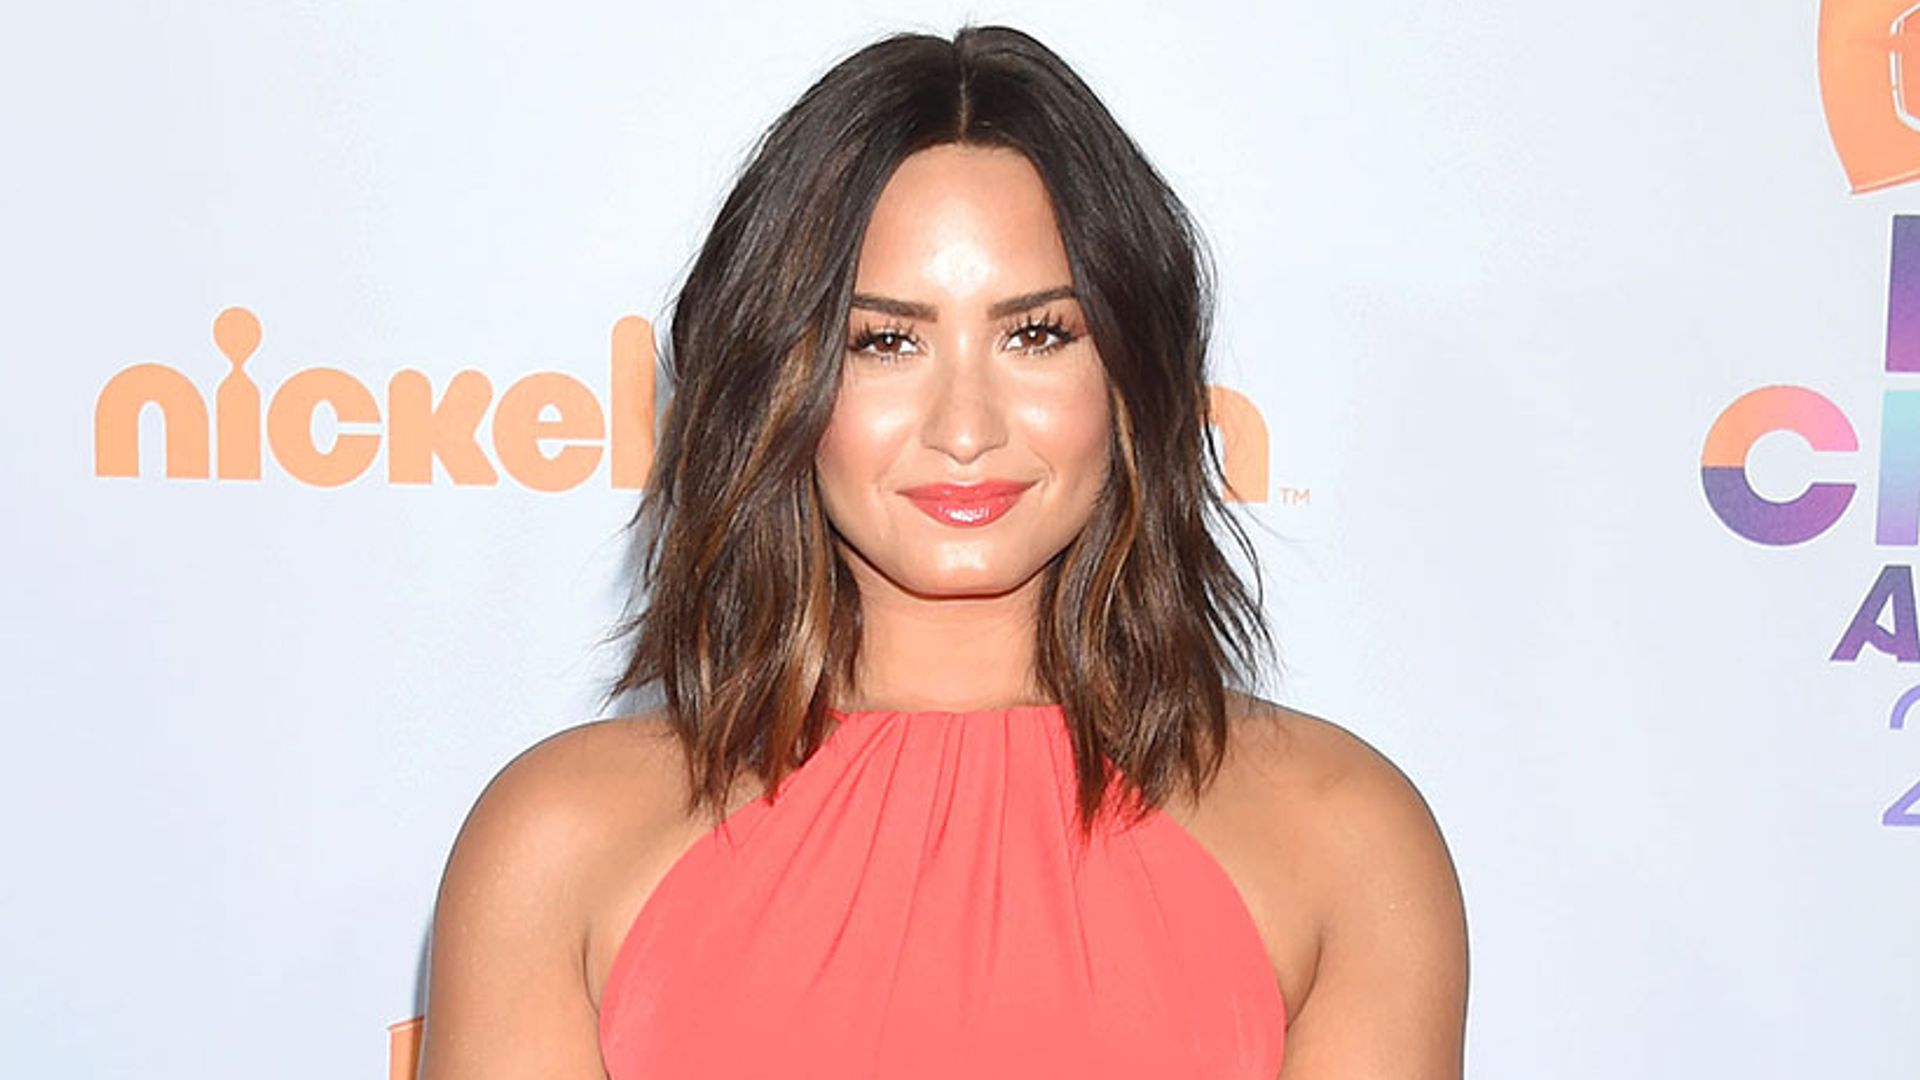 Demi Lovato celebrates five years of sobriety with heartfelt message